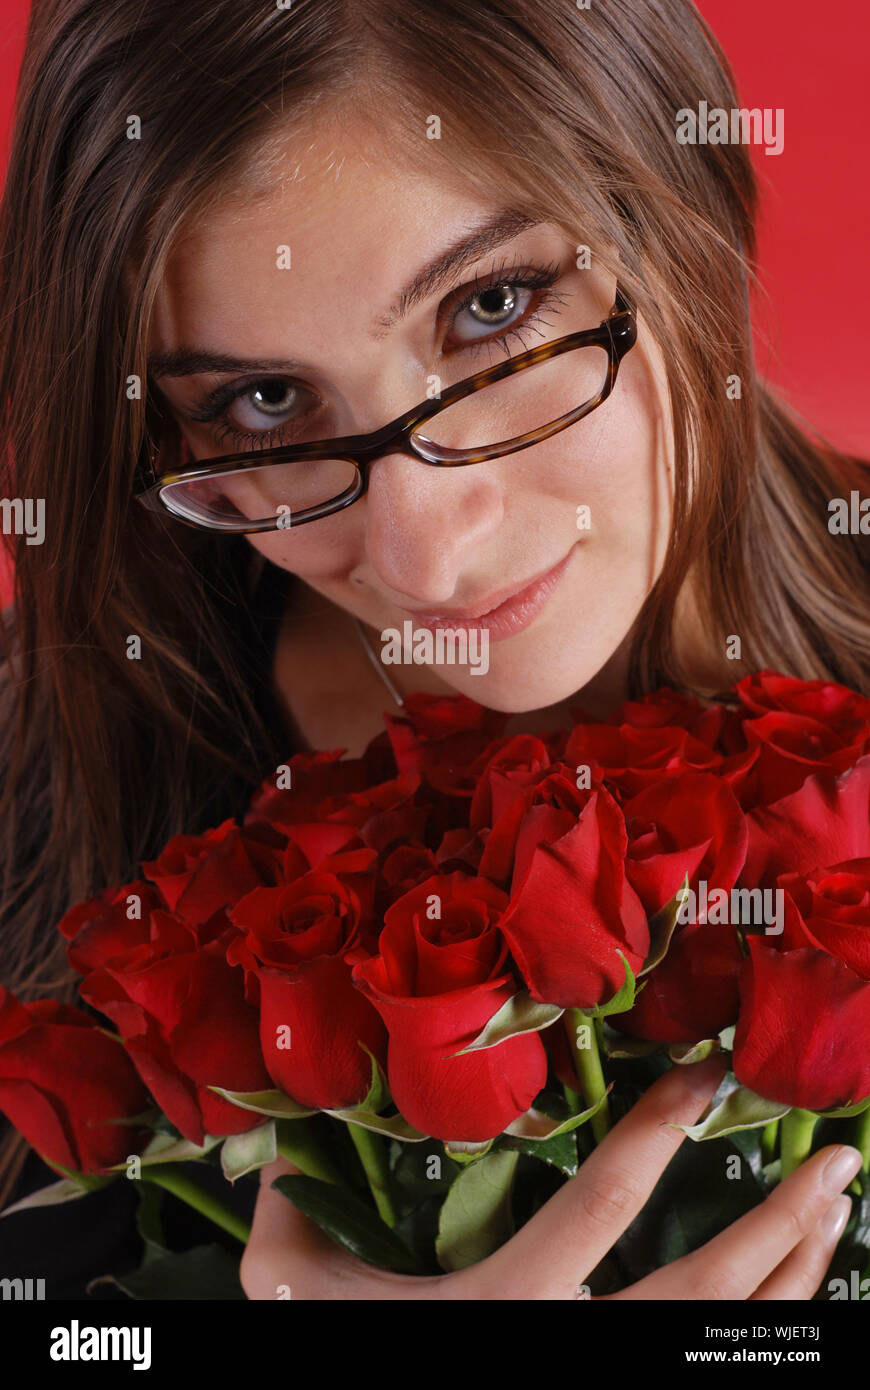 Beautiful woman with bouquet of roses Stock Photo